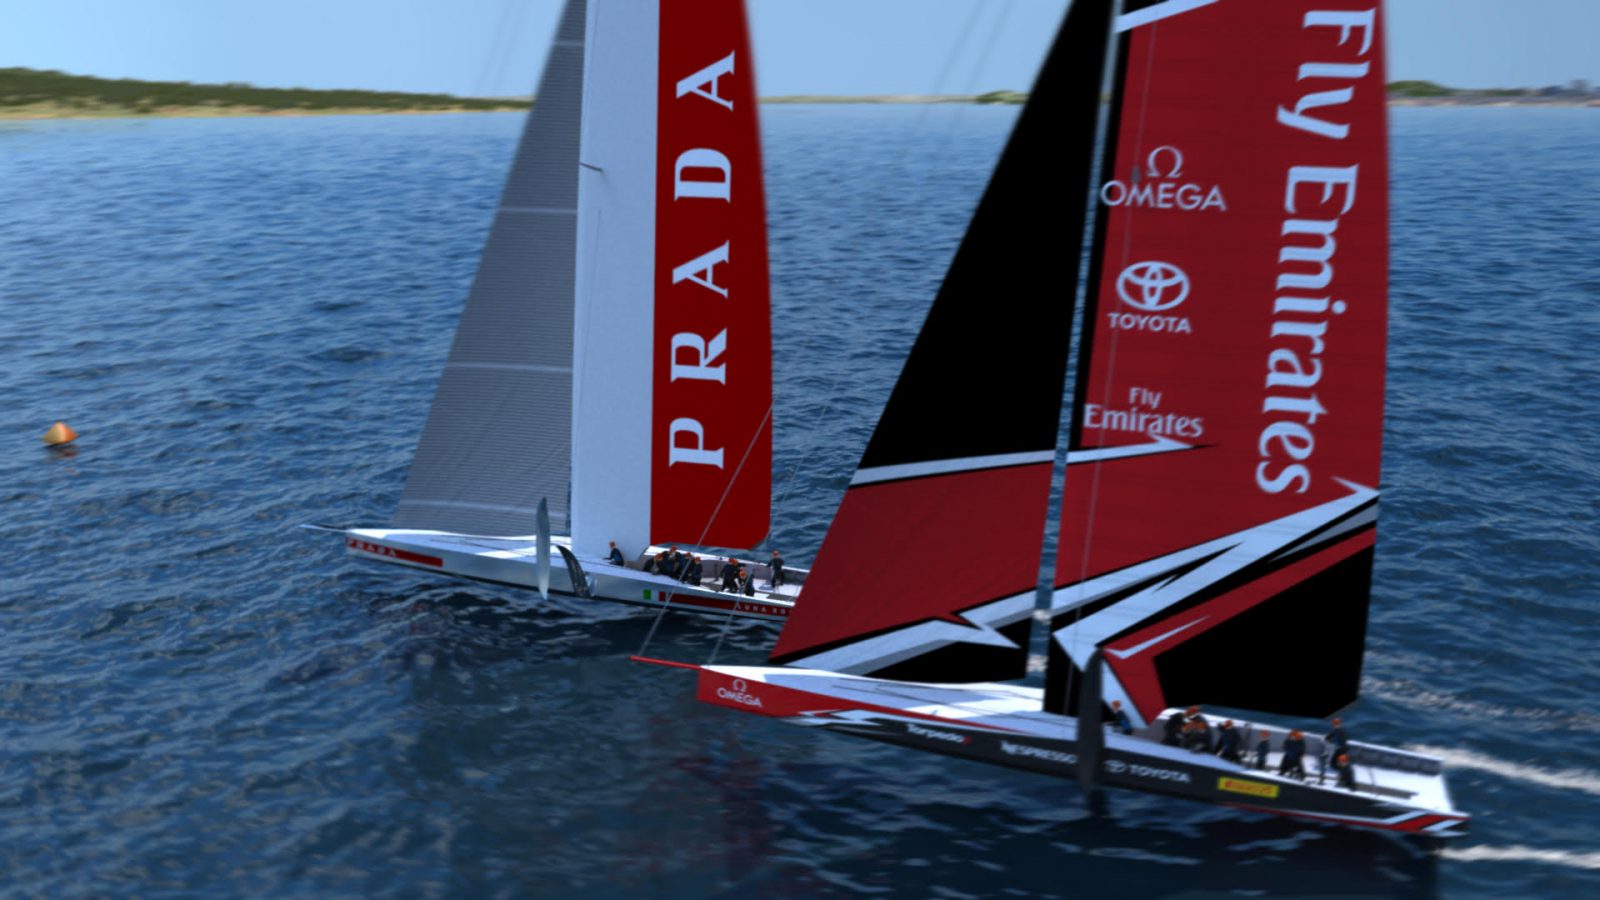 THE AMERICA'S CUP, 35TH EDITION - News